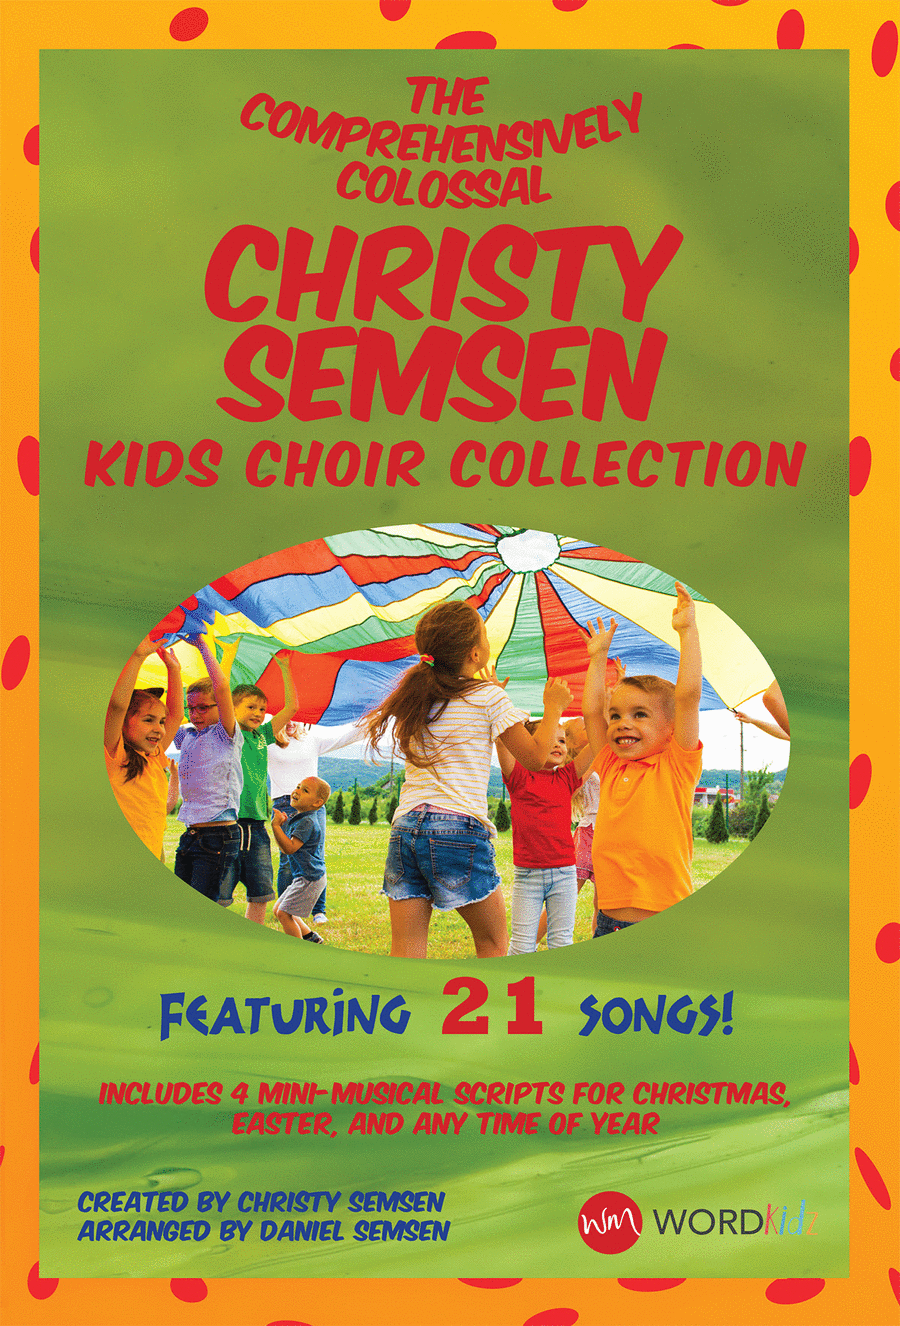 The Comprehensively Colossal Christy Semsen Kids Choir Collection - CD Preview Pak